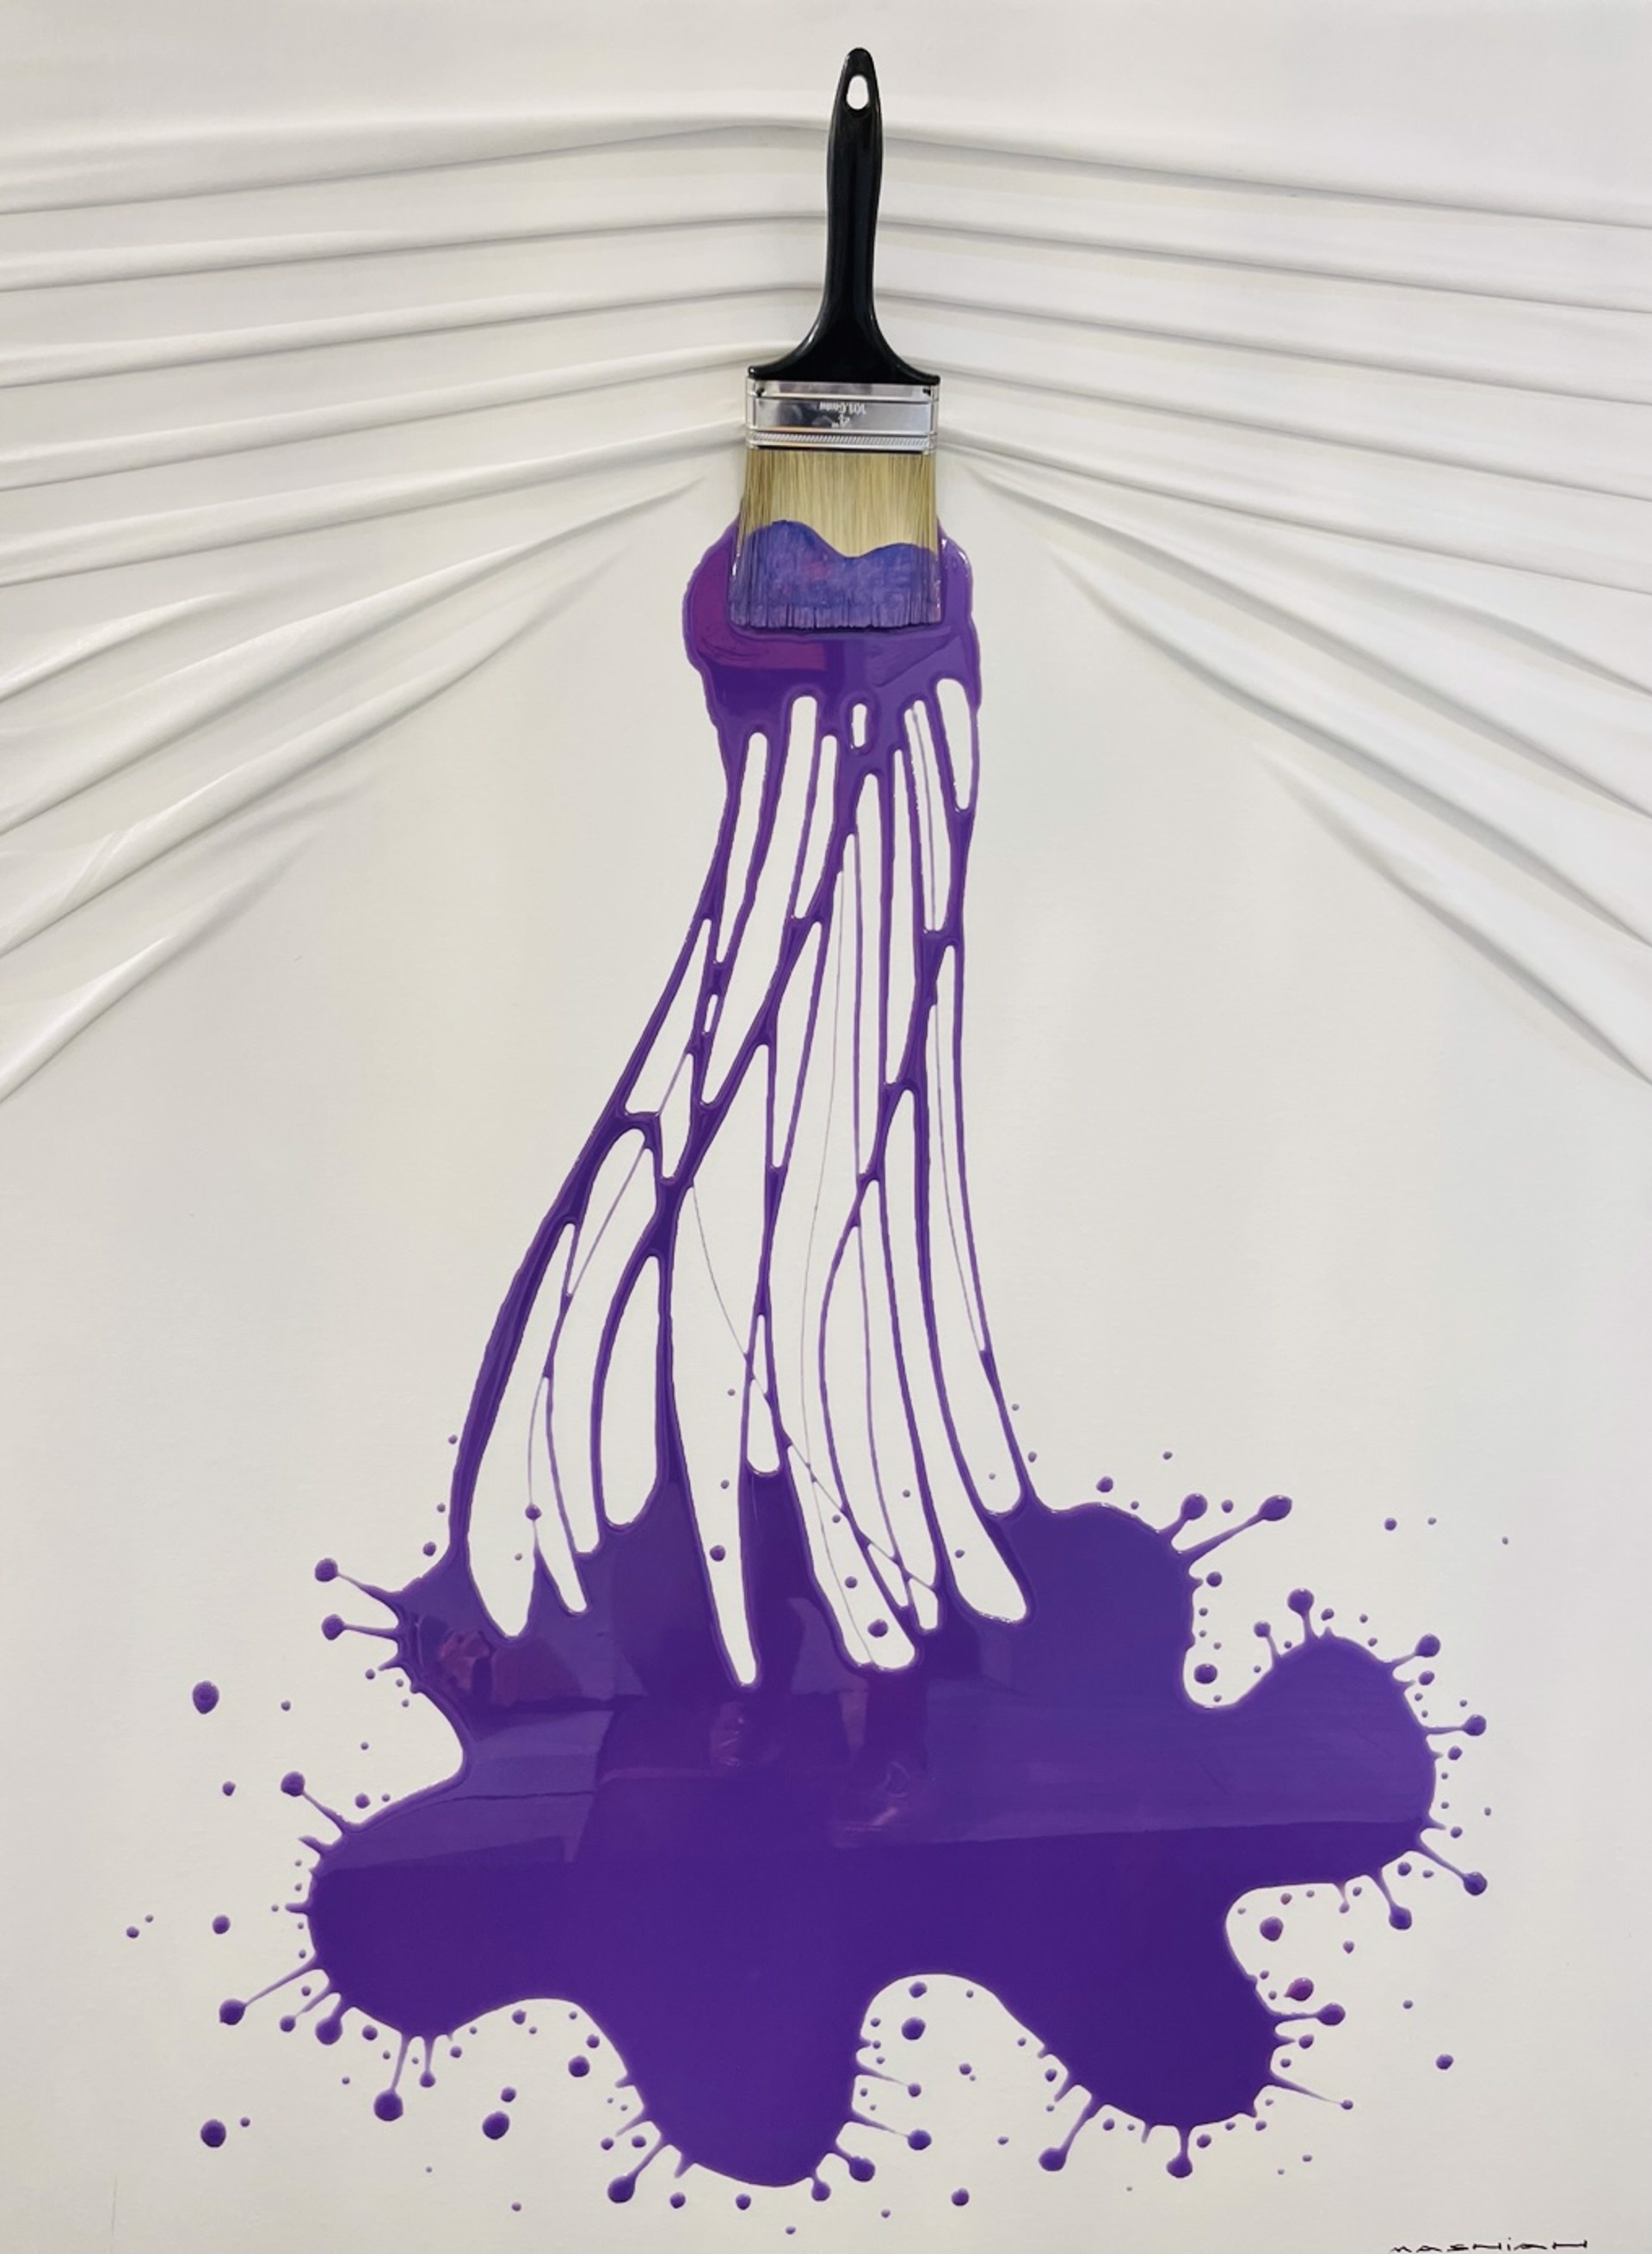 Purple Large Splash on the White Canvas by Brushes and Rollers "Let's Paint" by Efi Mashiah